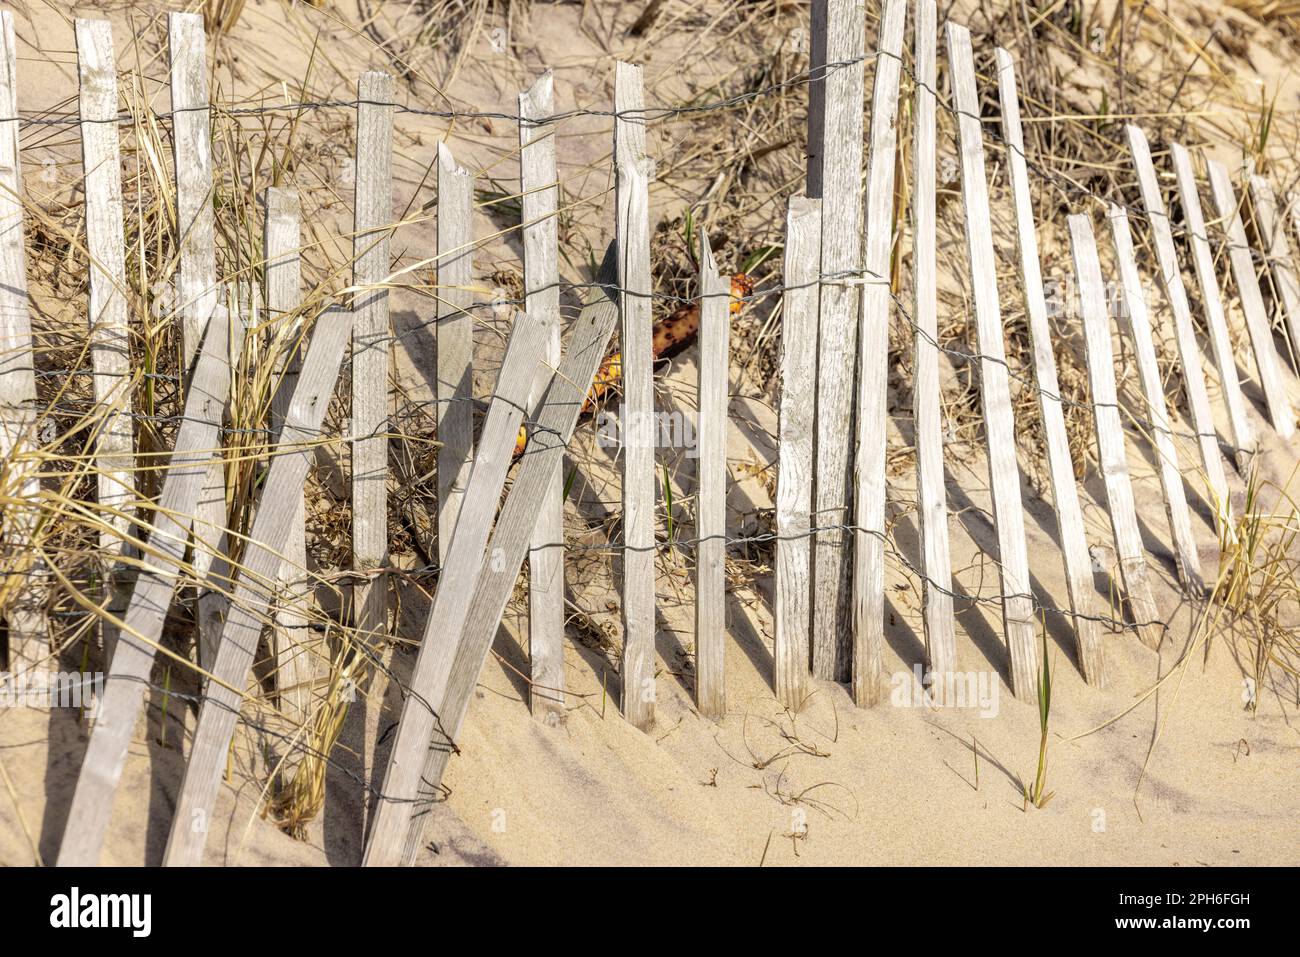 Images of beach fencing in the Amagansett ocean beach Stock Photo